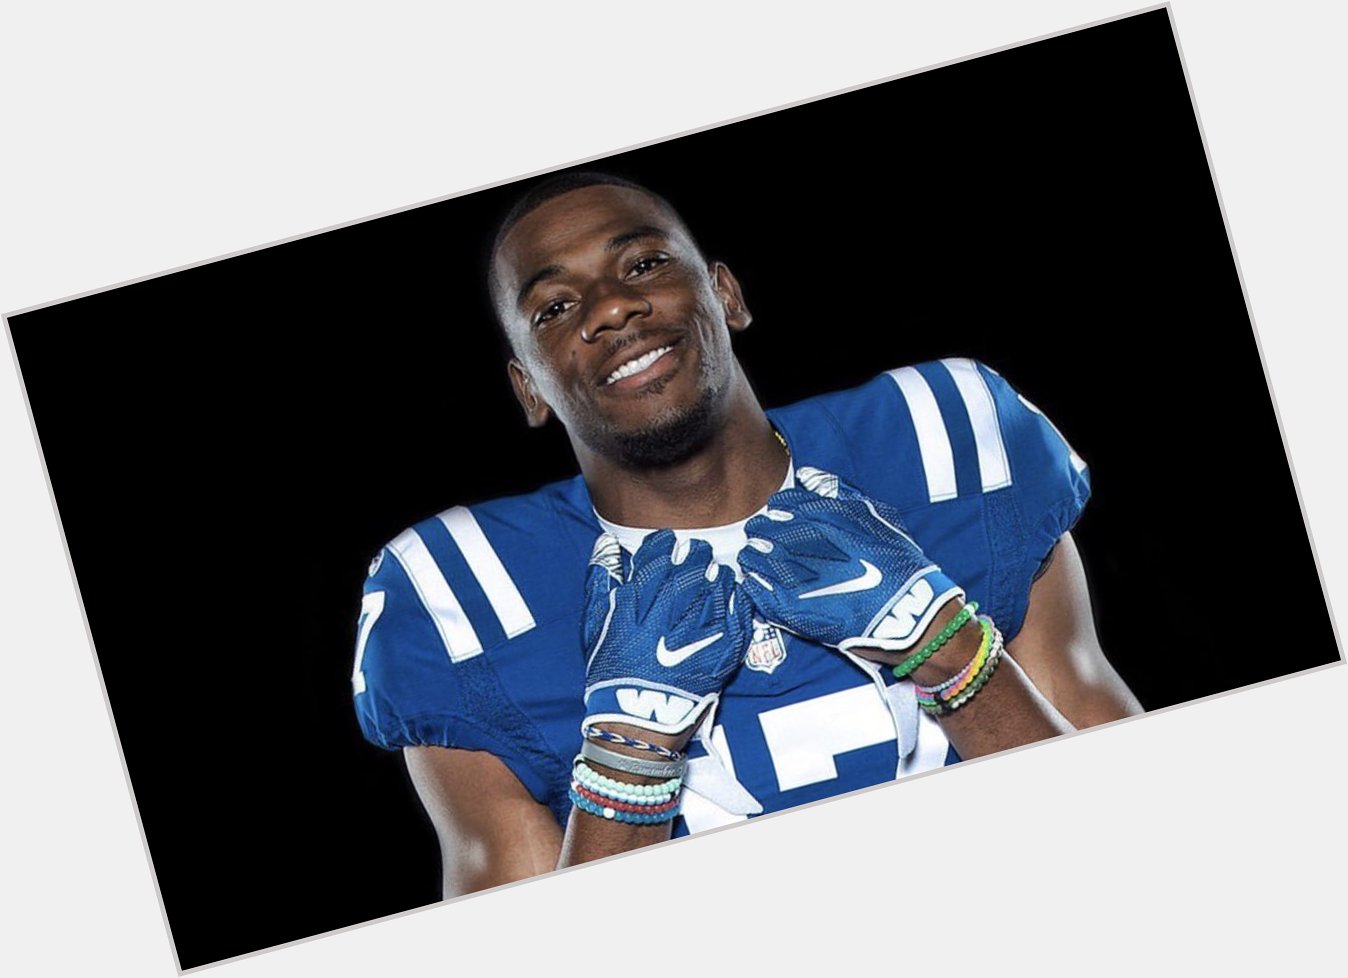 Colts fans, let s wish our new WR Devin Funchess a Happy Birthday! 